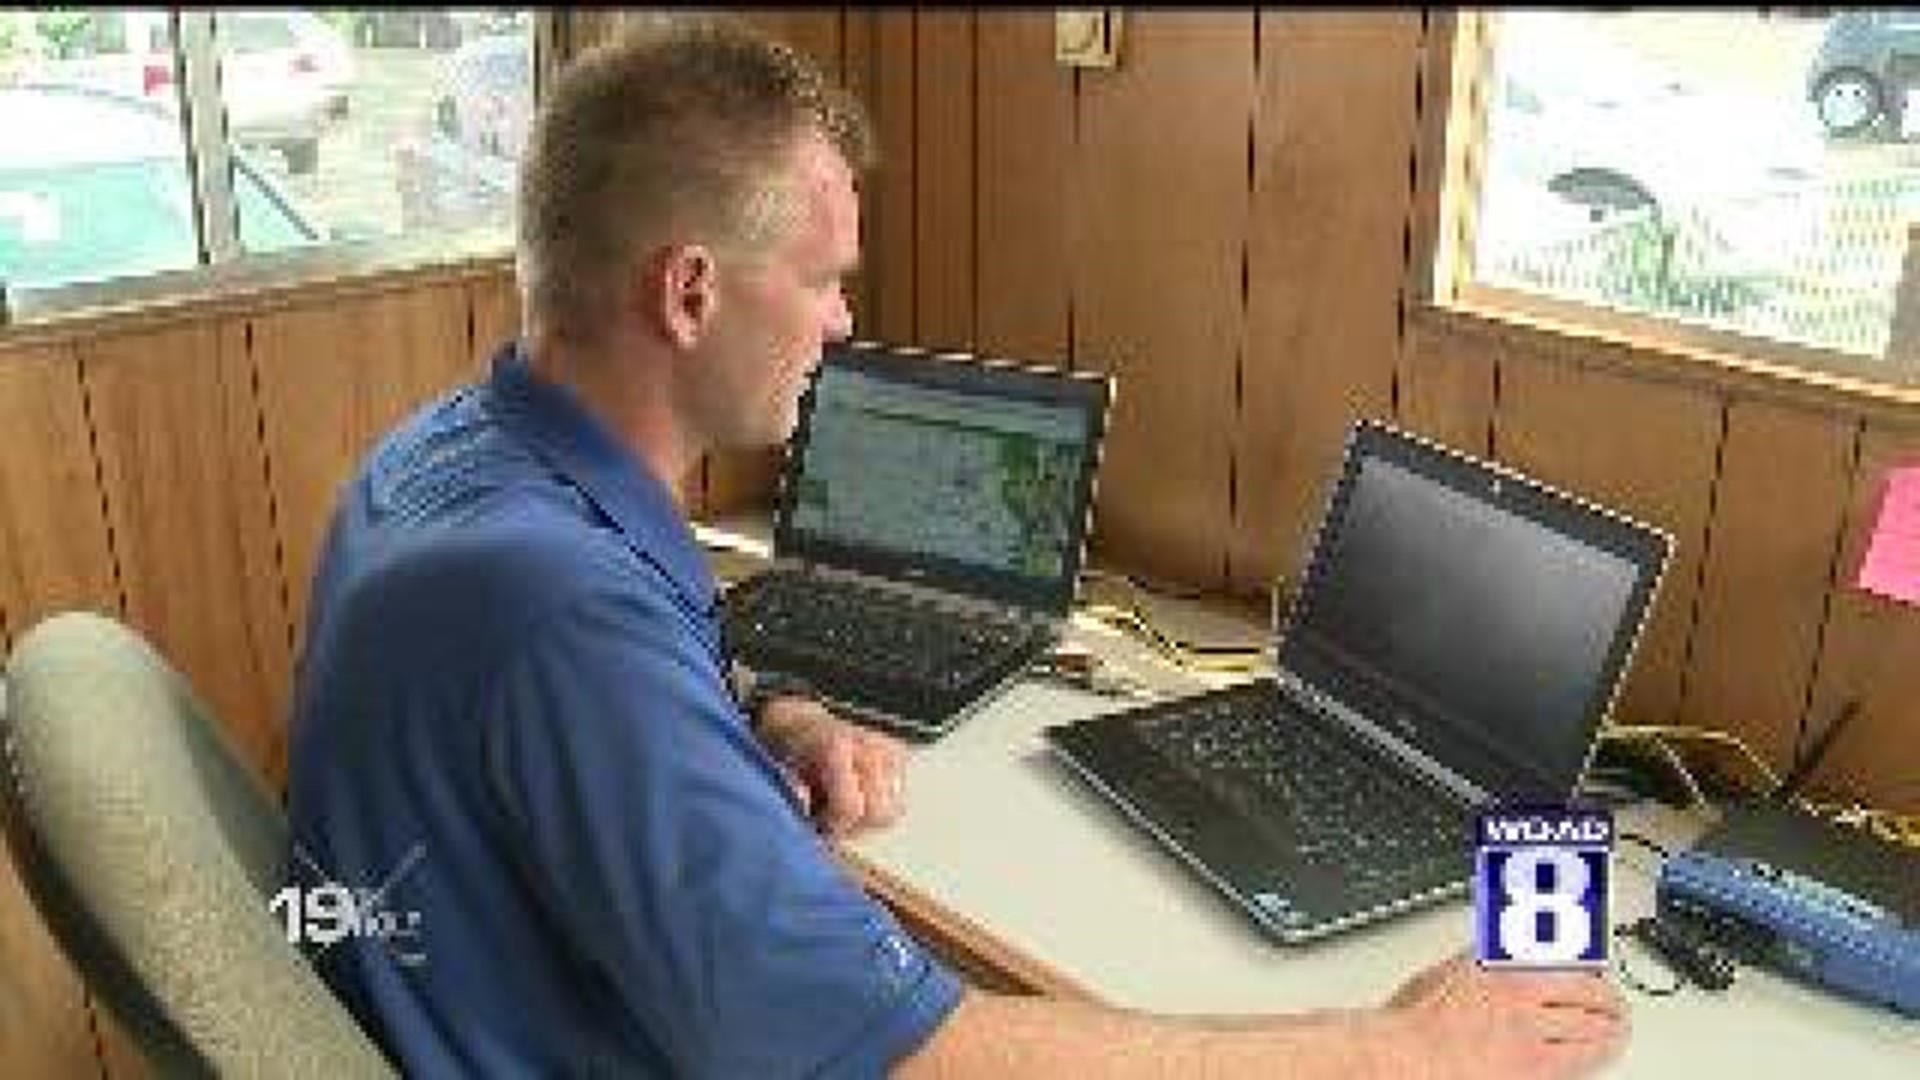 Meteorologist watches for stormy weather at Deere Run